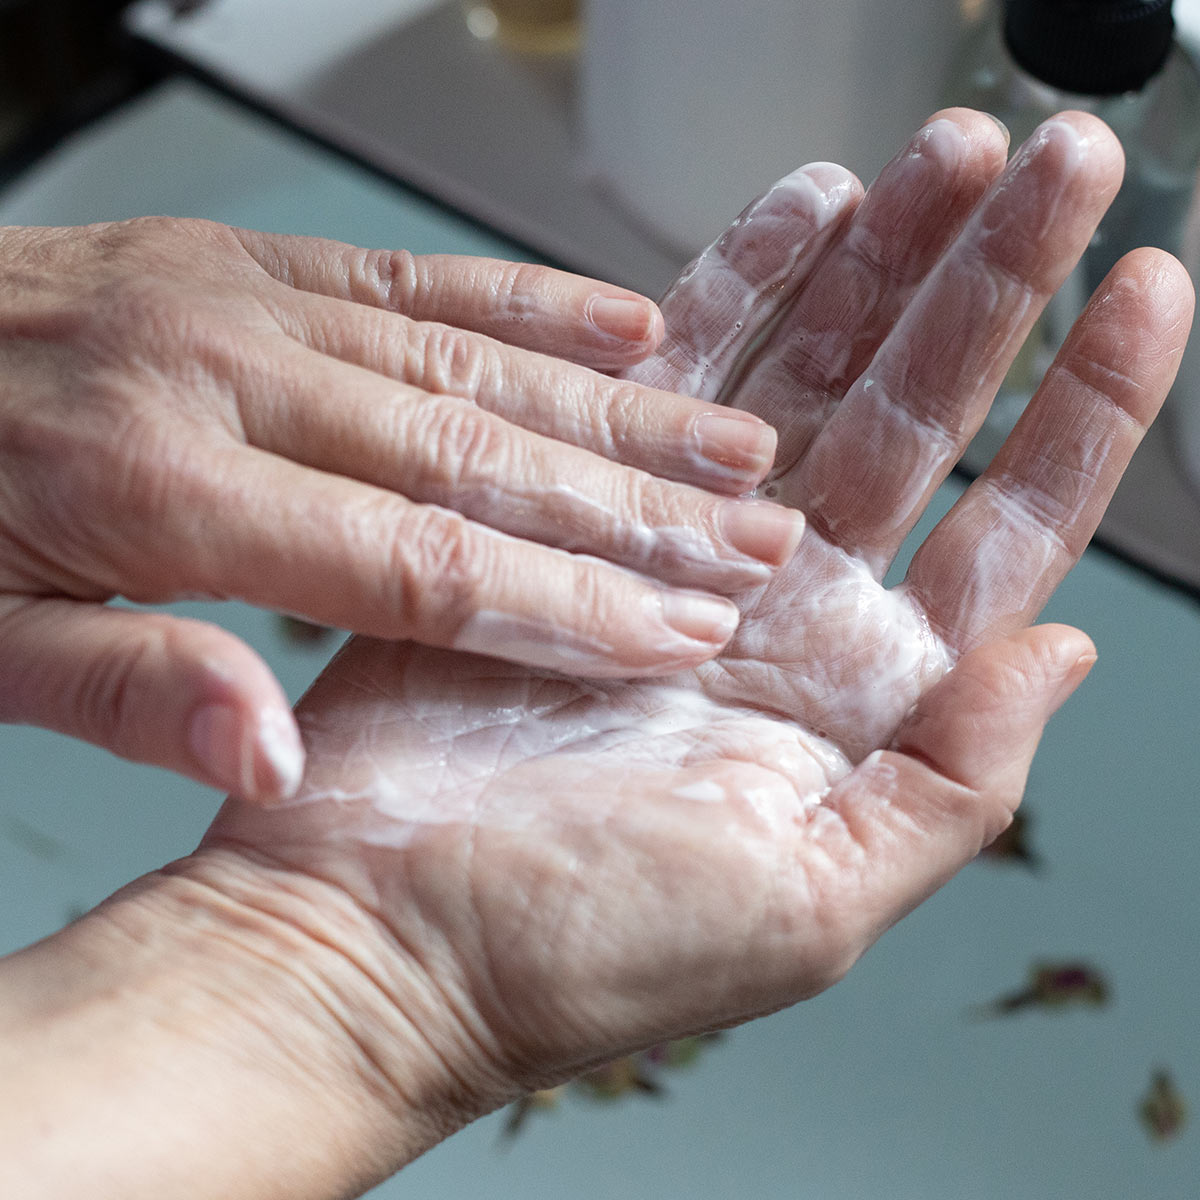 texture of creamy facial cleansing milk cleanser between palms of hands